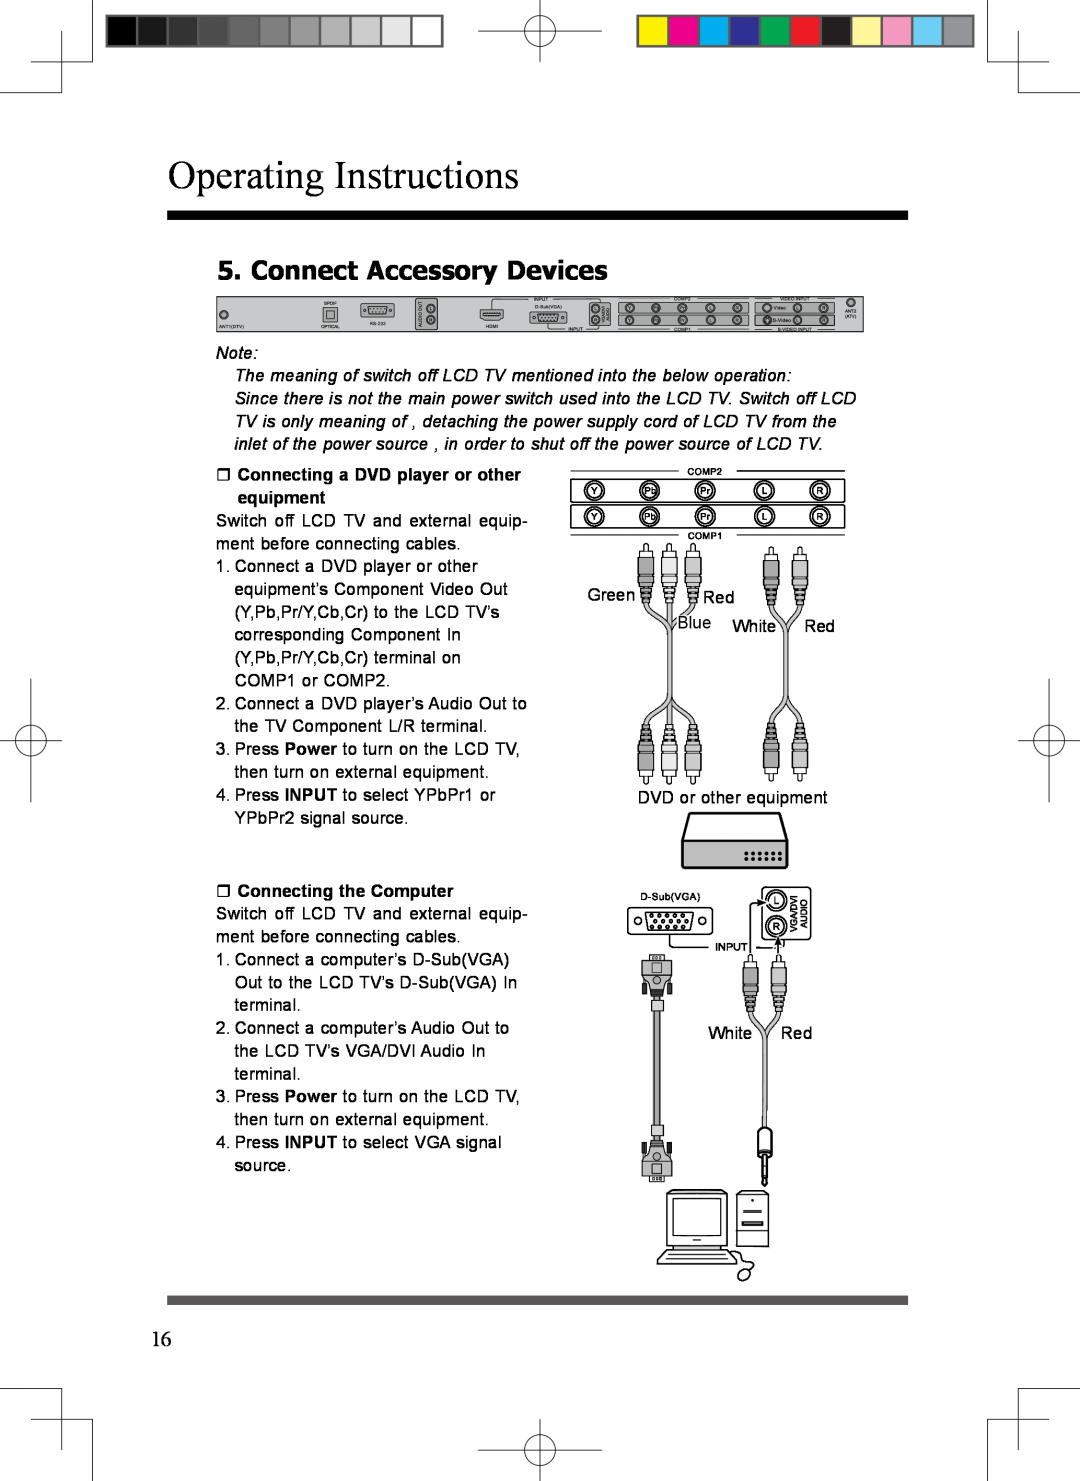 Scott LCT37SHA manual Connect Accessory Devices, The meaning of switch off LCD TV mentioned into the below operation 